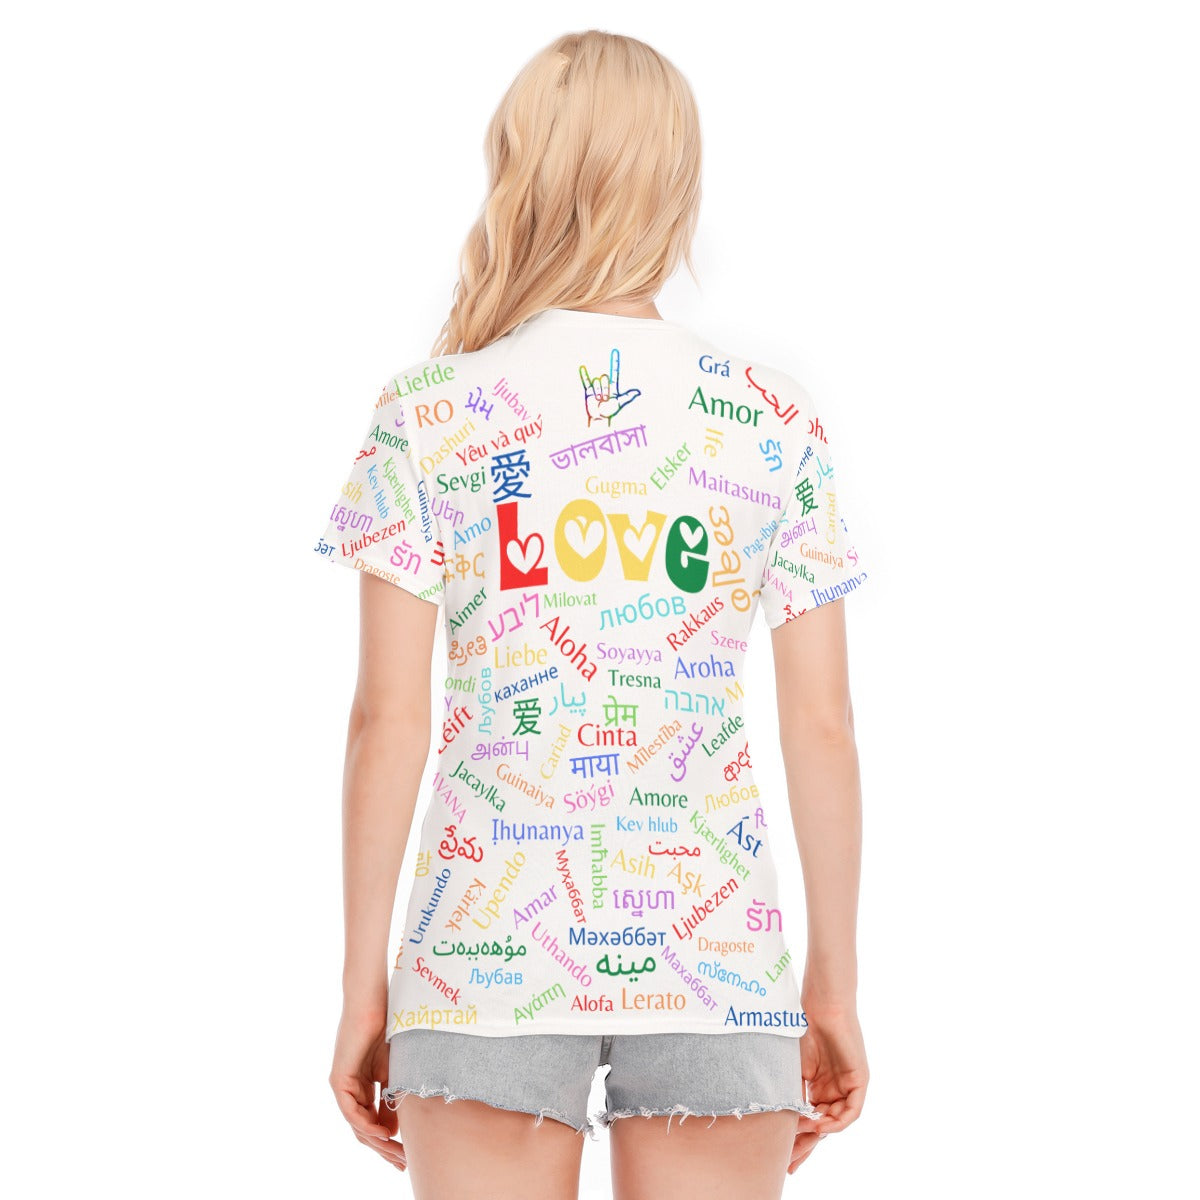 Women's 100% Cotton "LOVE" Crew Neck T-Shirt - Grooves Fashion and Footwear